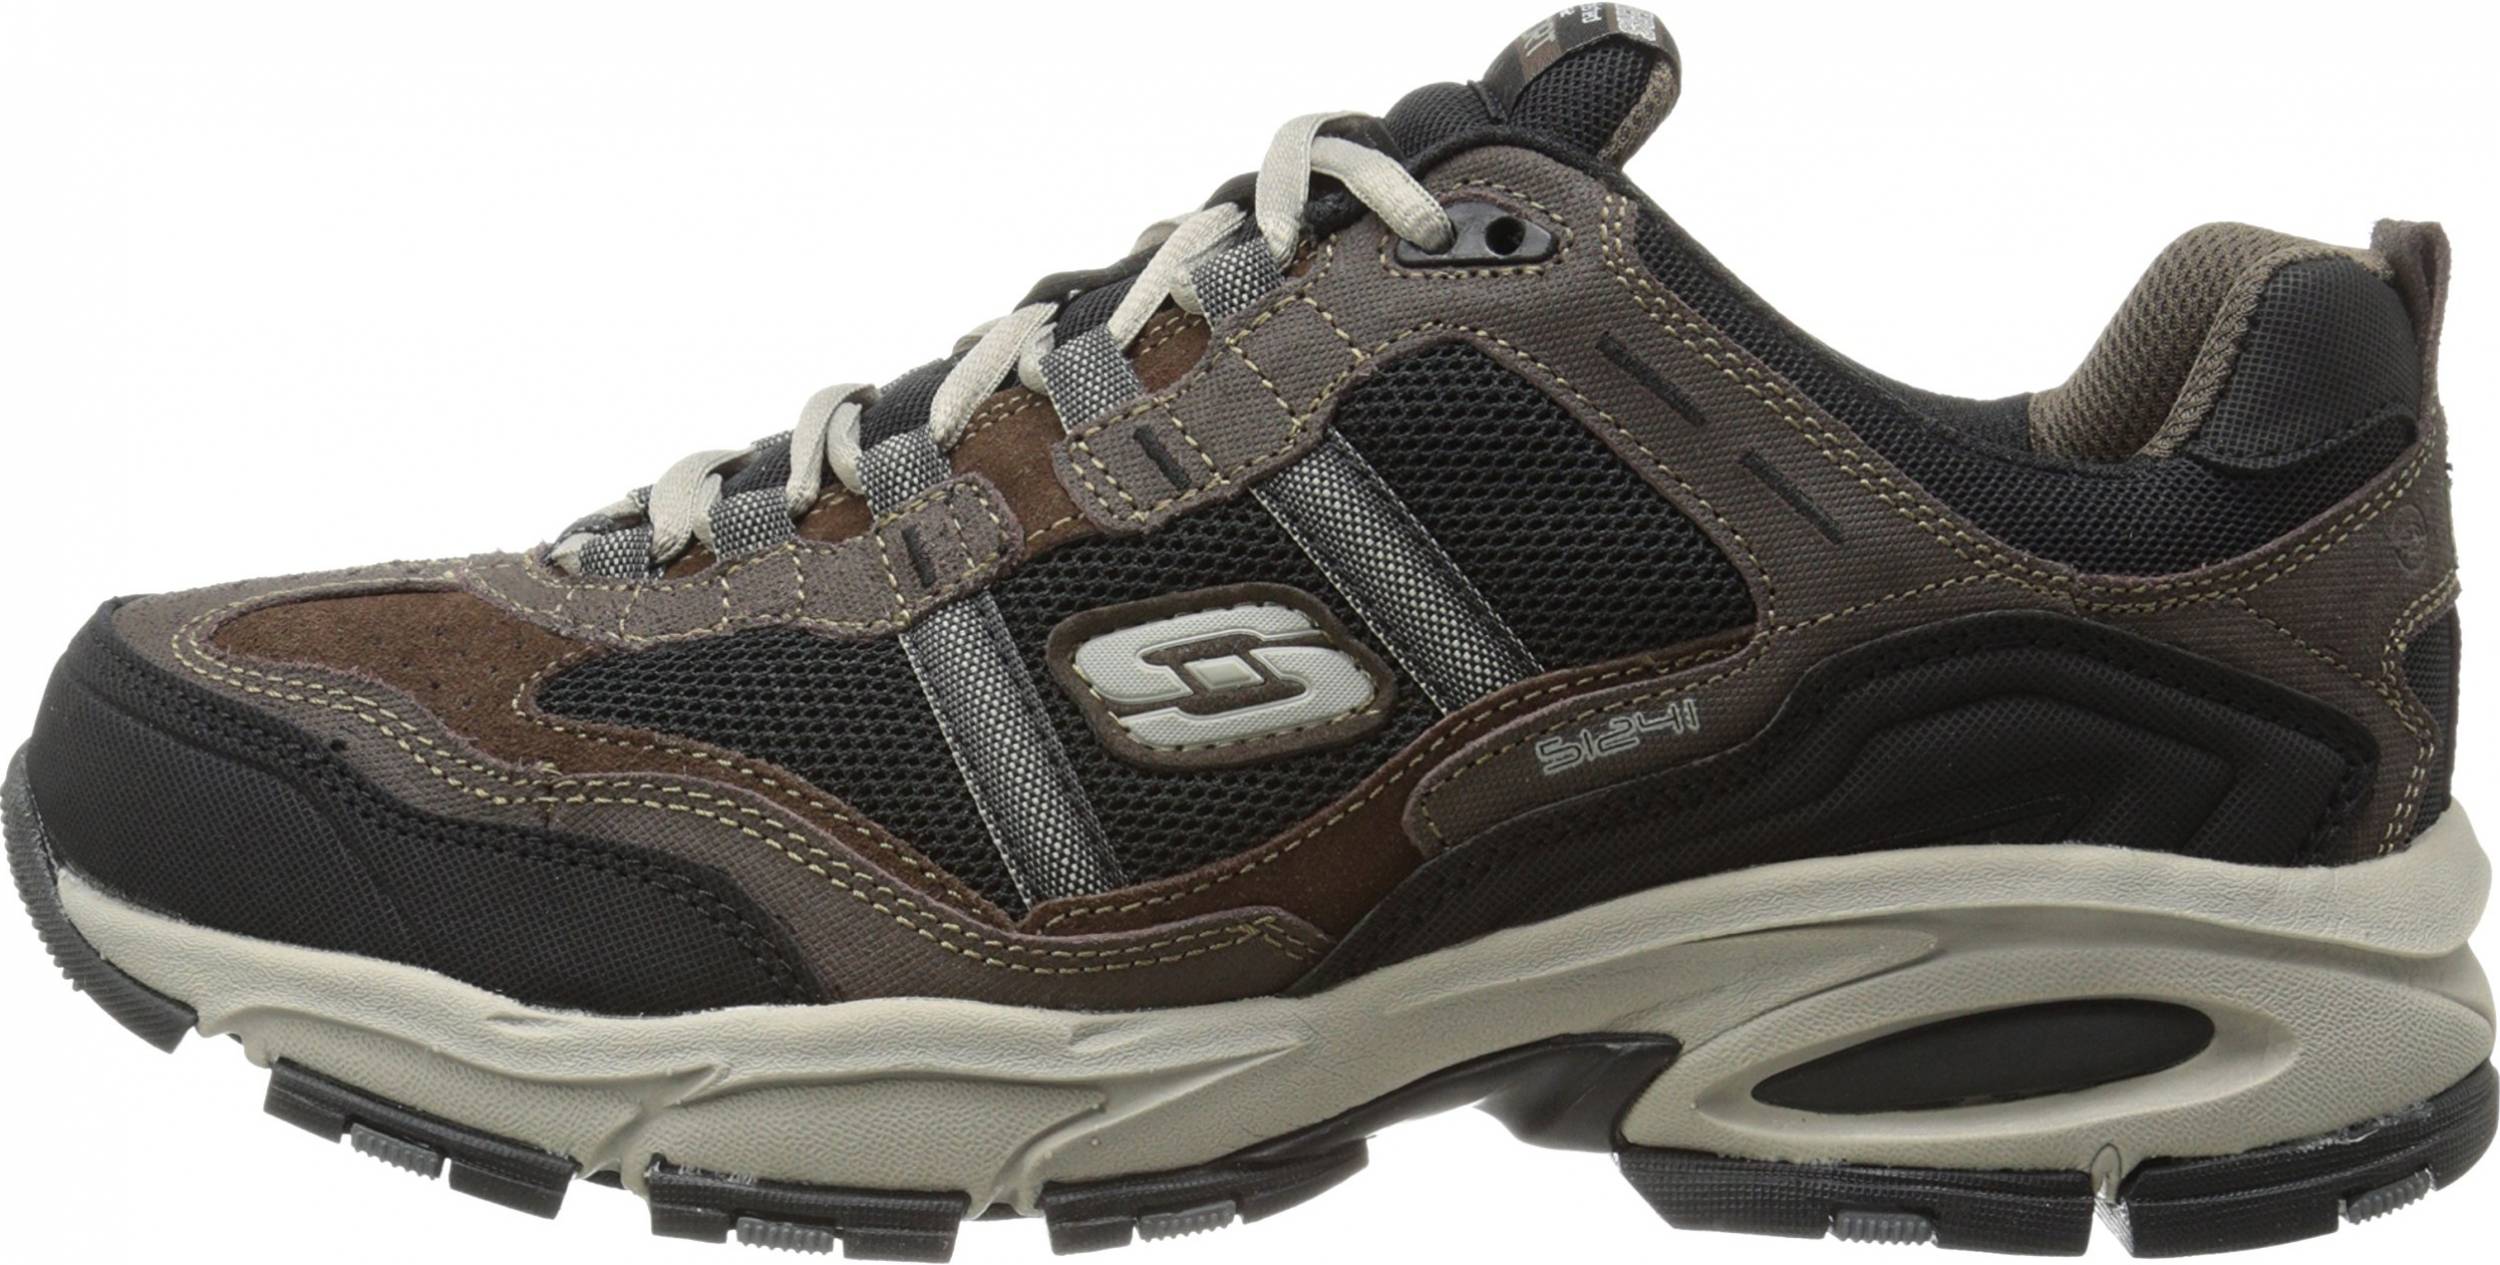 are skechers good workout shoes